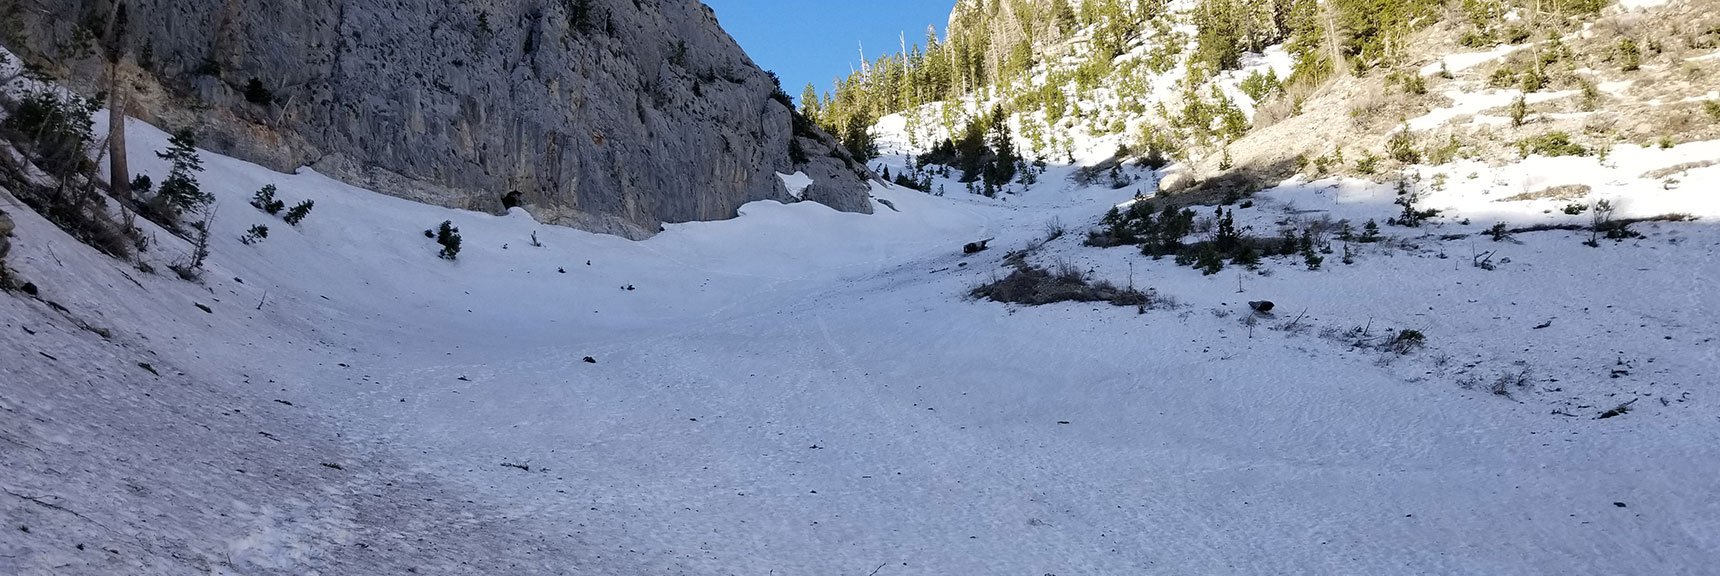 First June 2019 Snowfield on Trail to Griffith Peak, Nevada